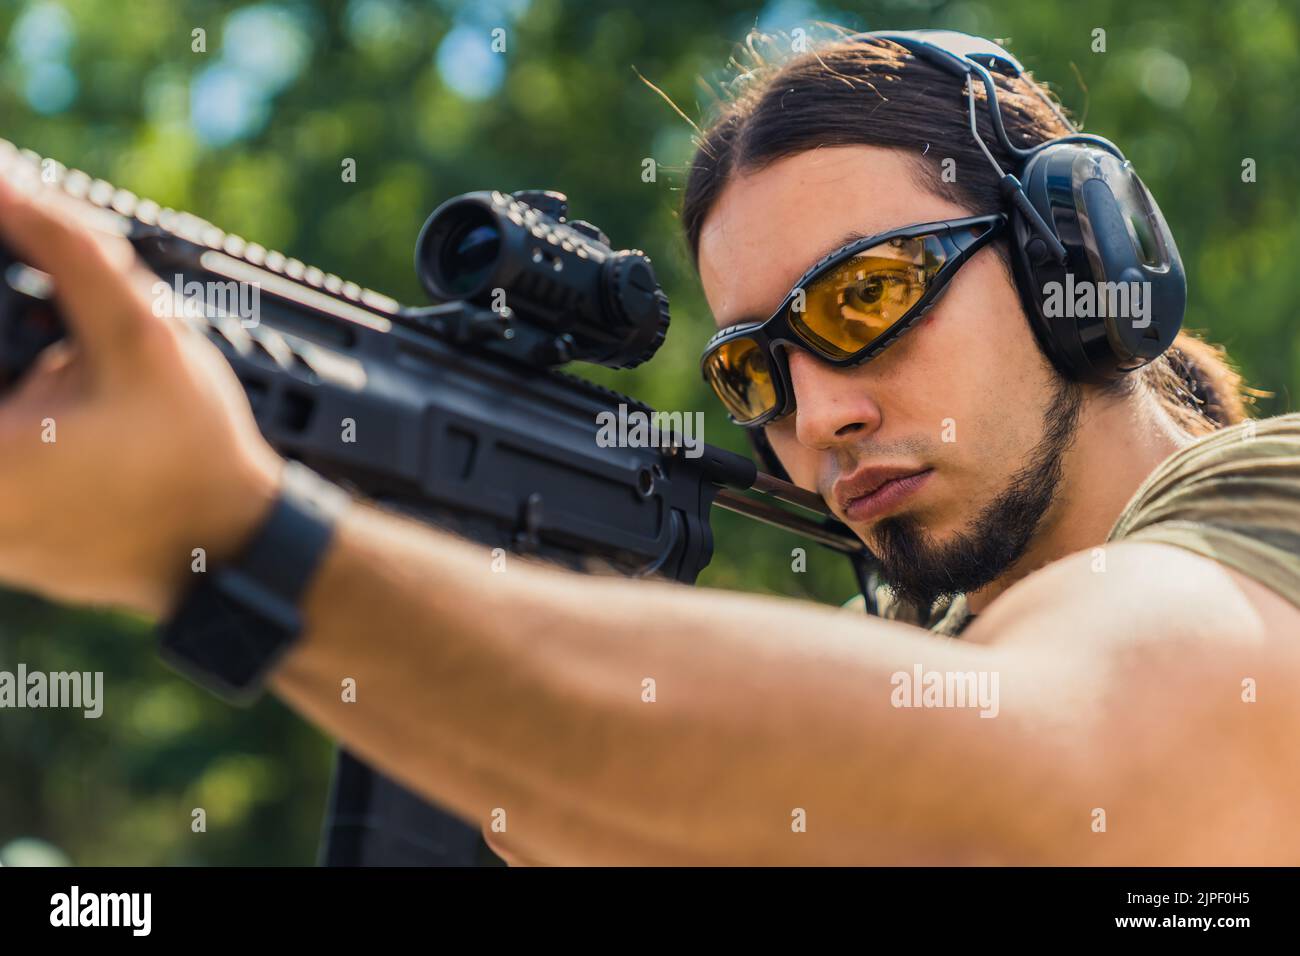 White man with beard in protective goggles and headphones aiming submachine gun. Outdoor firing range. Horizontal shot. High quality photo Stock Photo